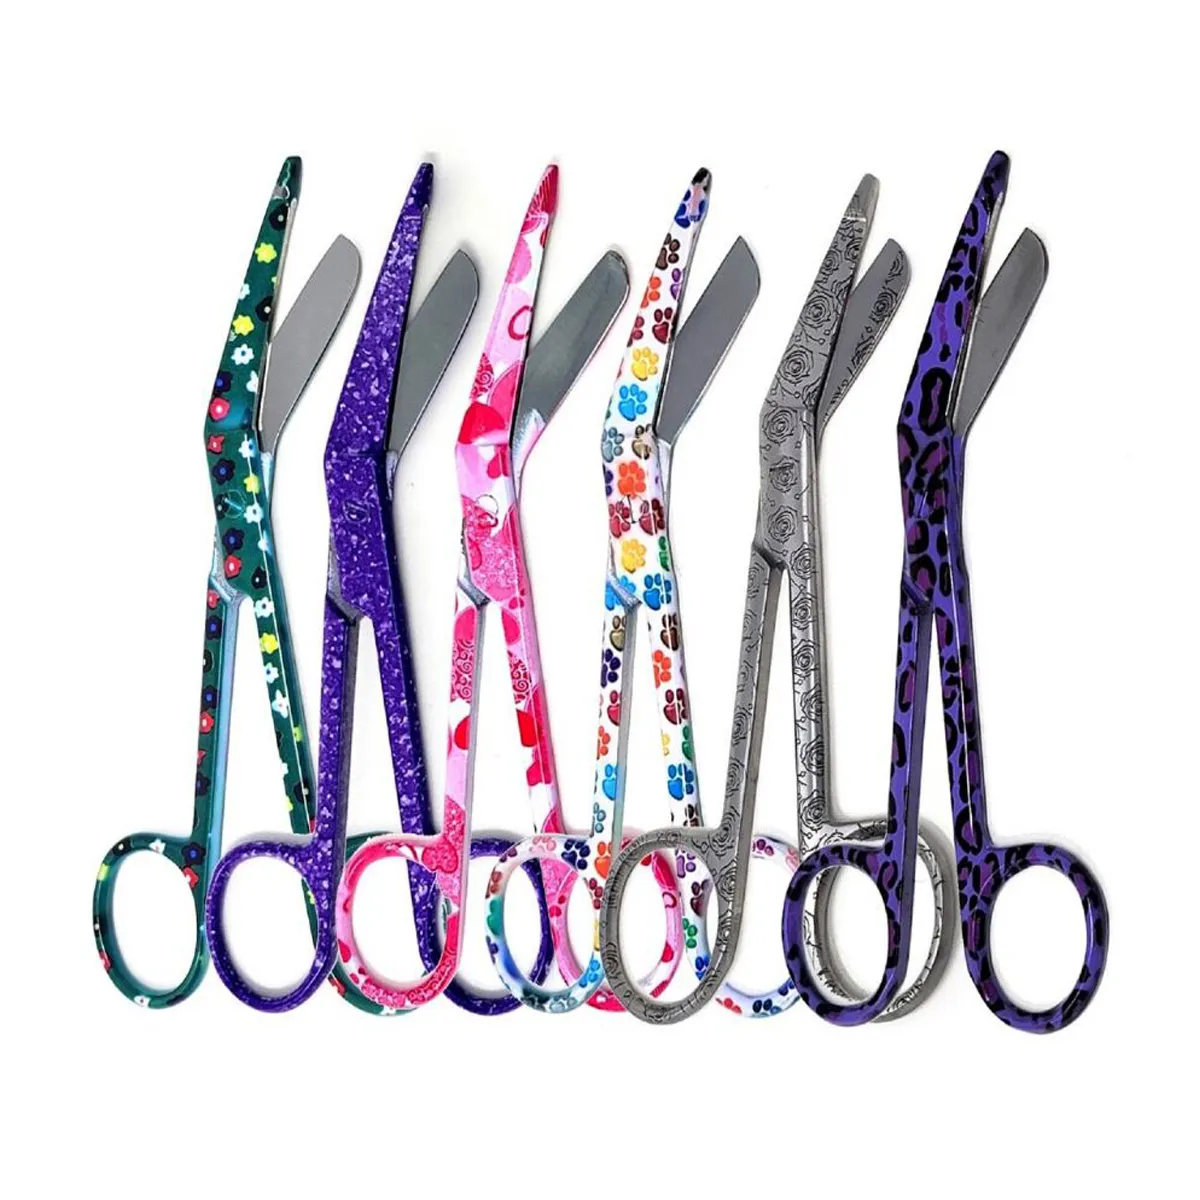 Top Quality Medical Care and Home Medical Trauma Shears Lister With Stainless Steel material made bandage scissor